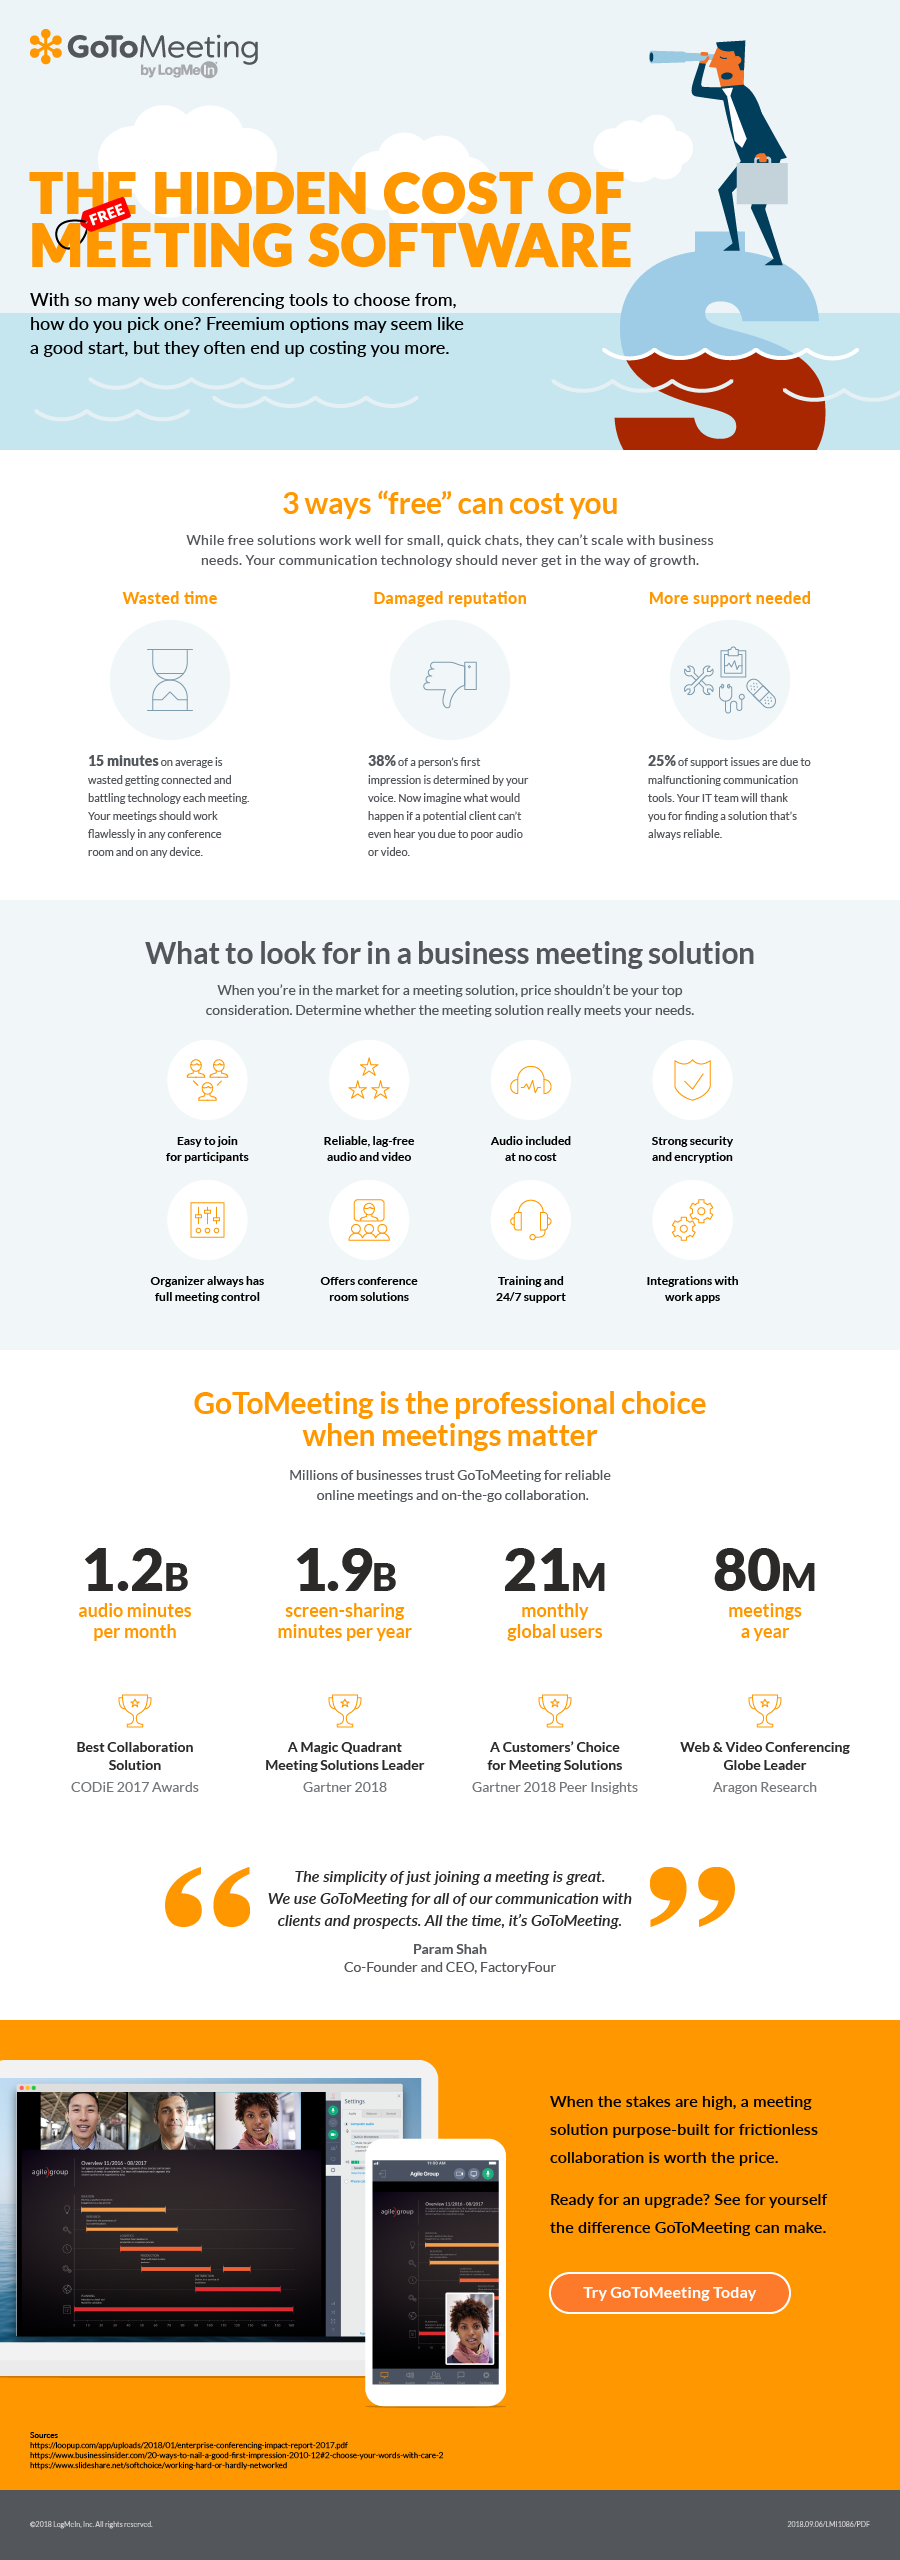 GoToMeeting Infographic: Millenials and Meetings